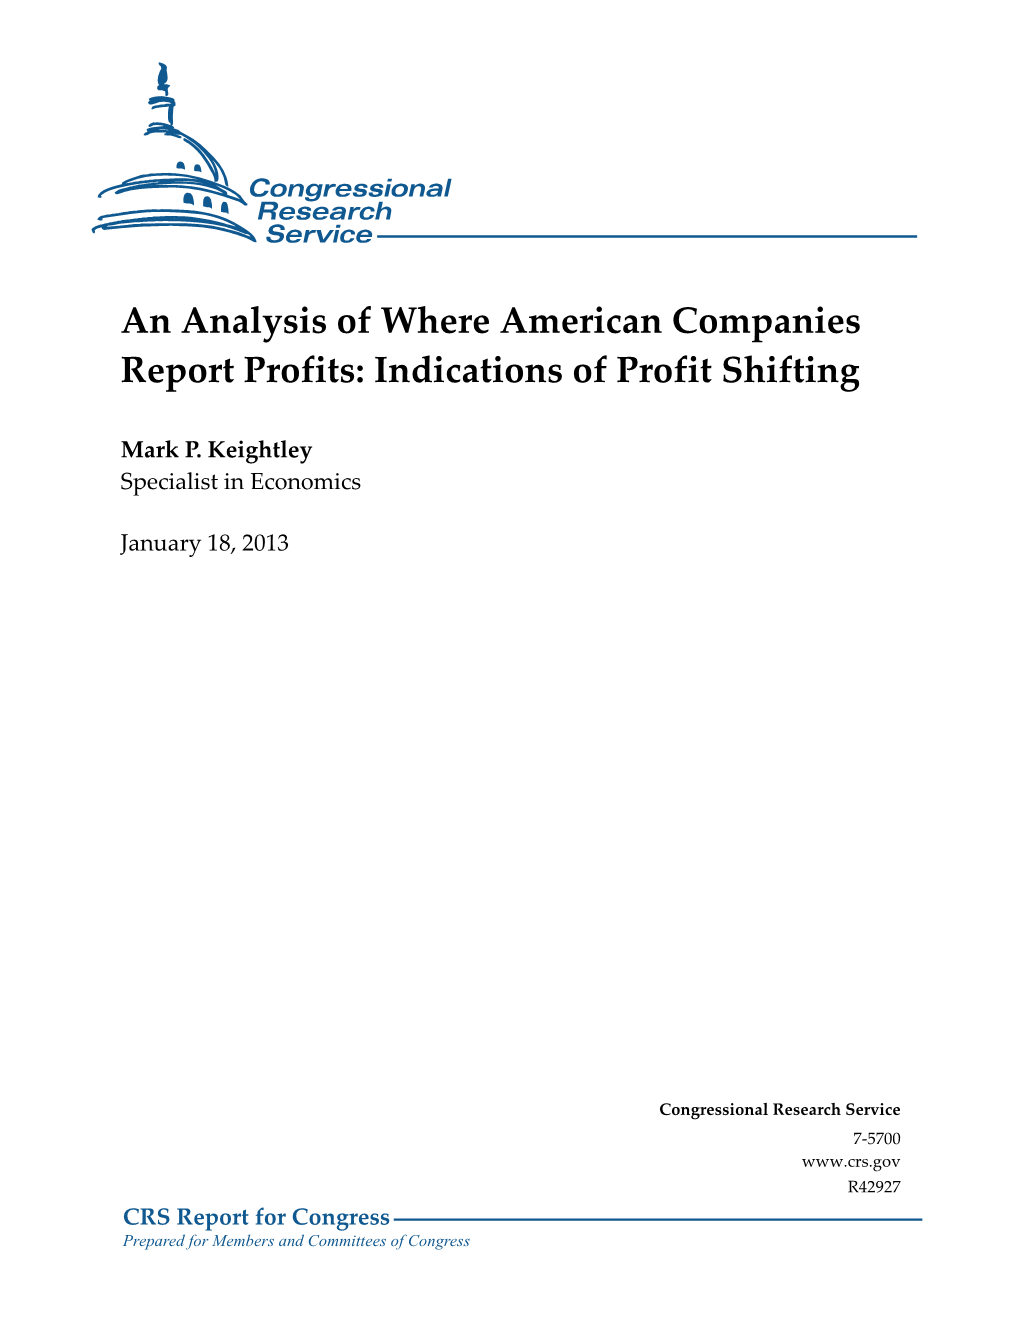 An Analysis of Where American Companies Report Profits: Indications of Profit Shifting